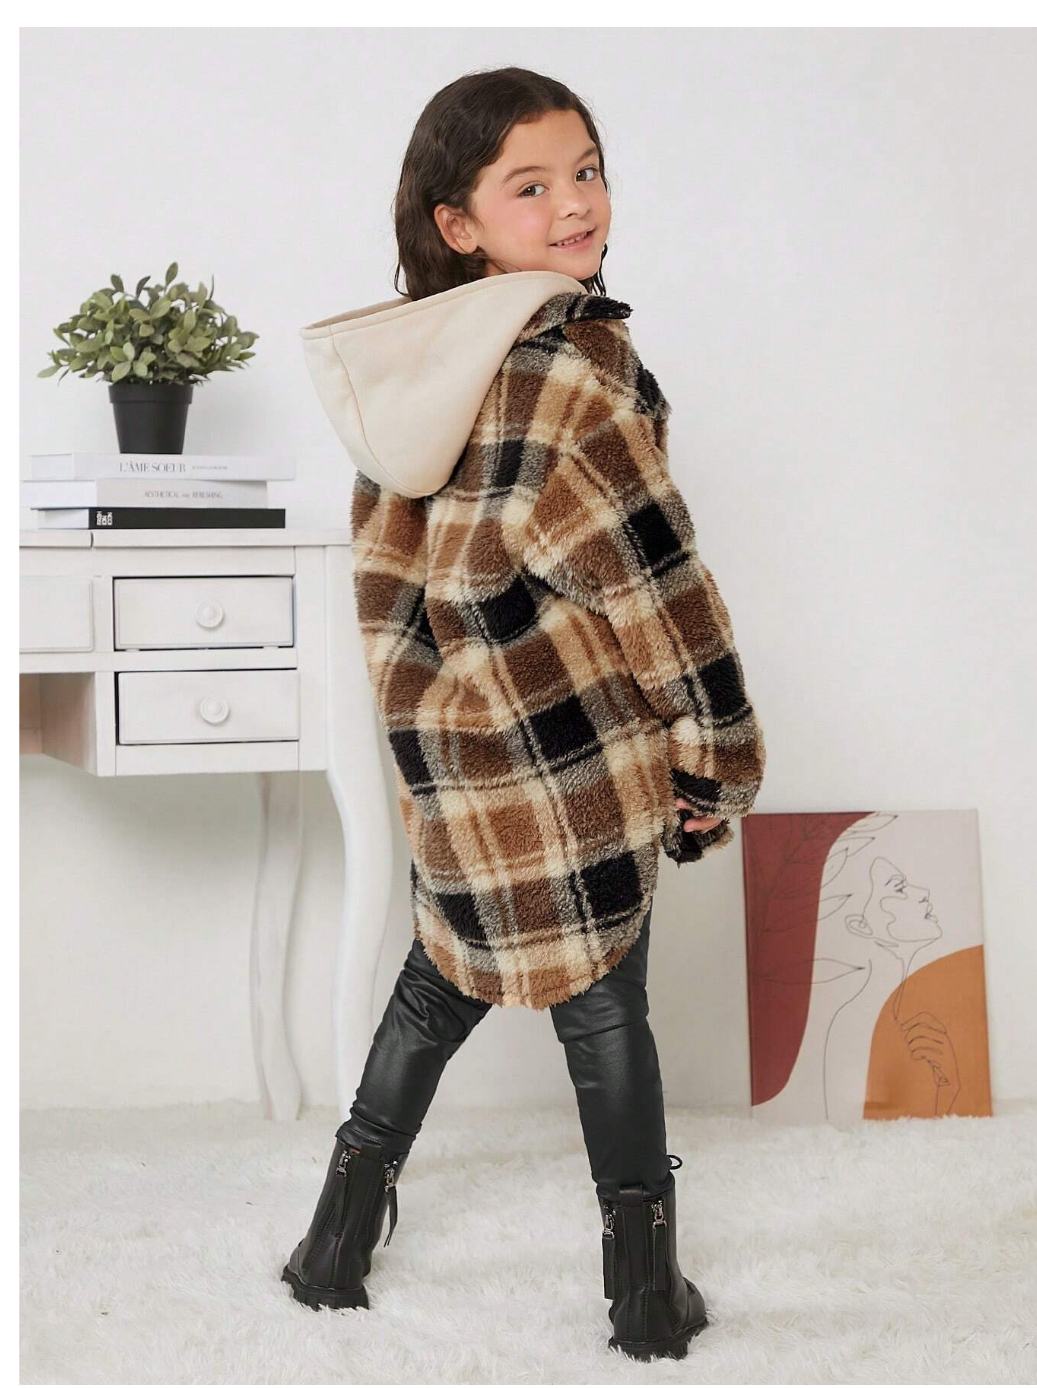 Plaid Princess: Kids Cooltwn Unveils the Irresistibly Chic Hooded Teddy Coat for Tween Girls – Snuggle up in Style!